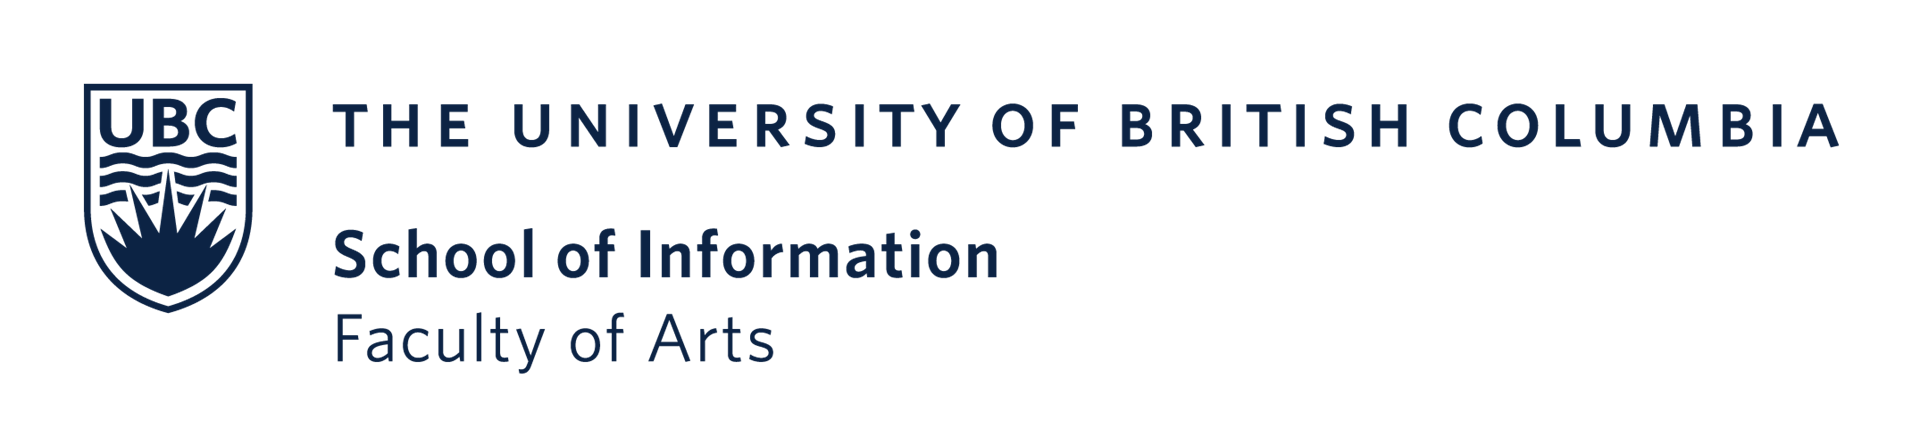 The University of British Columbia School of Information, Faculty of Arts